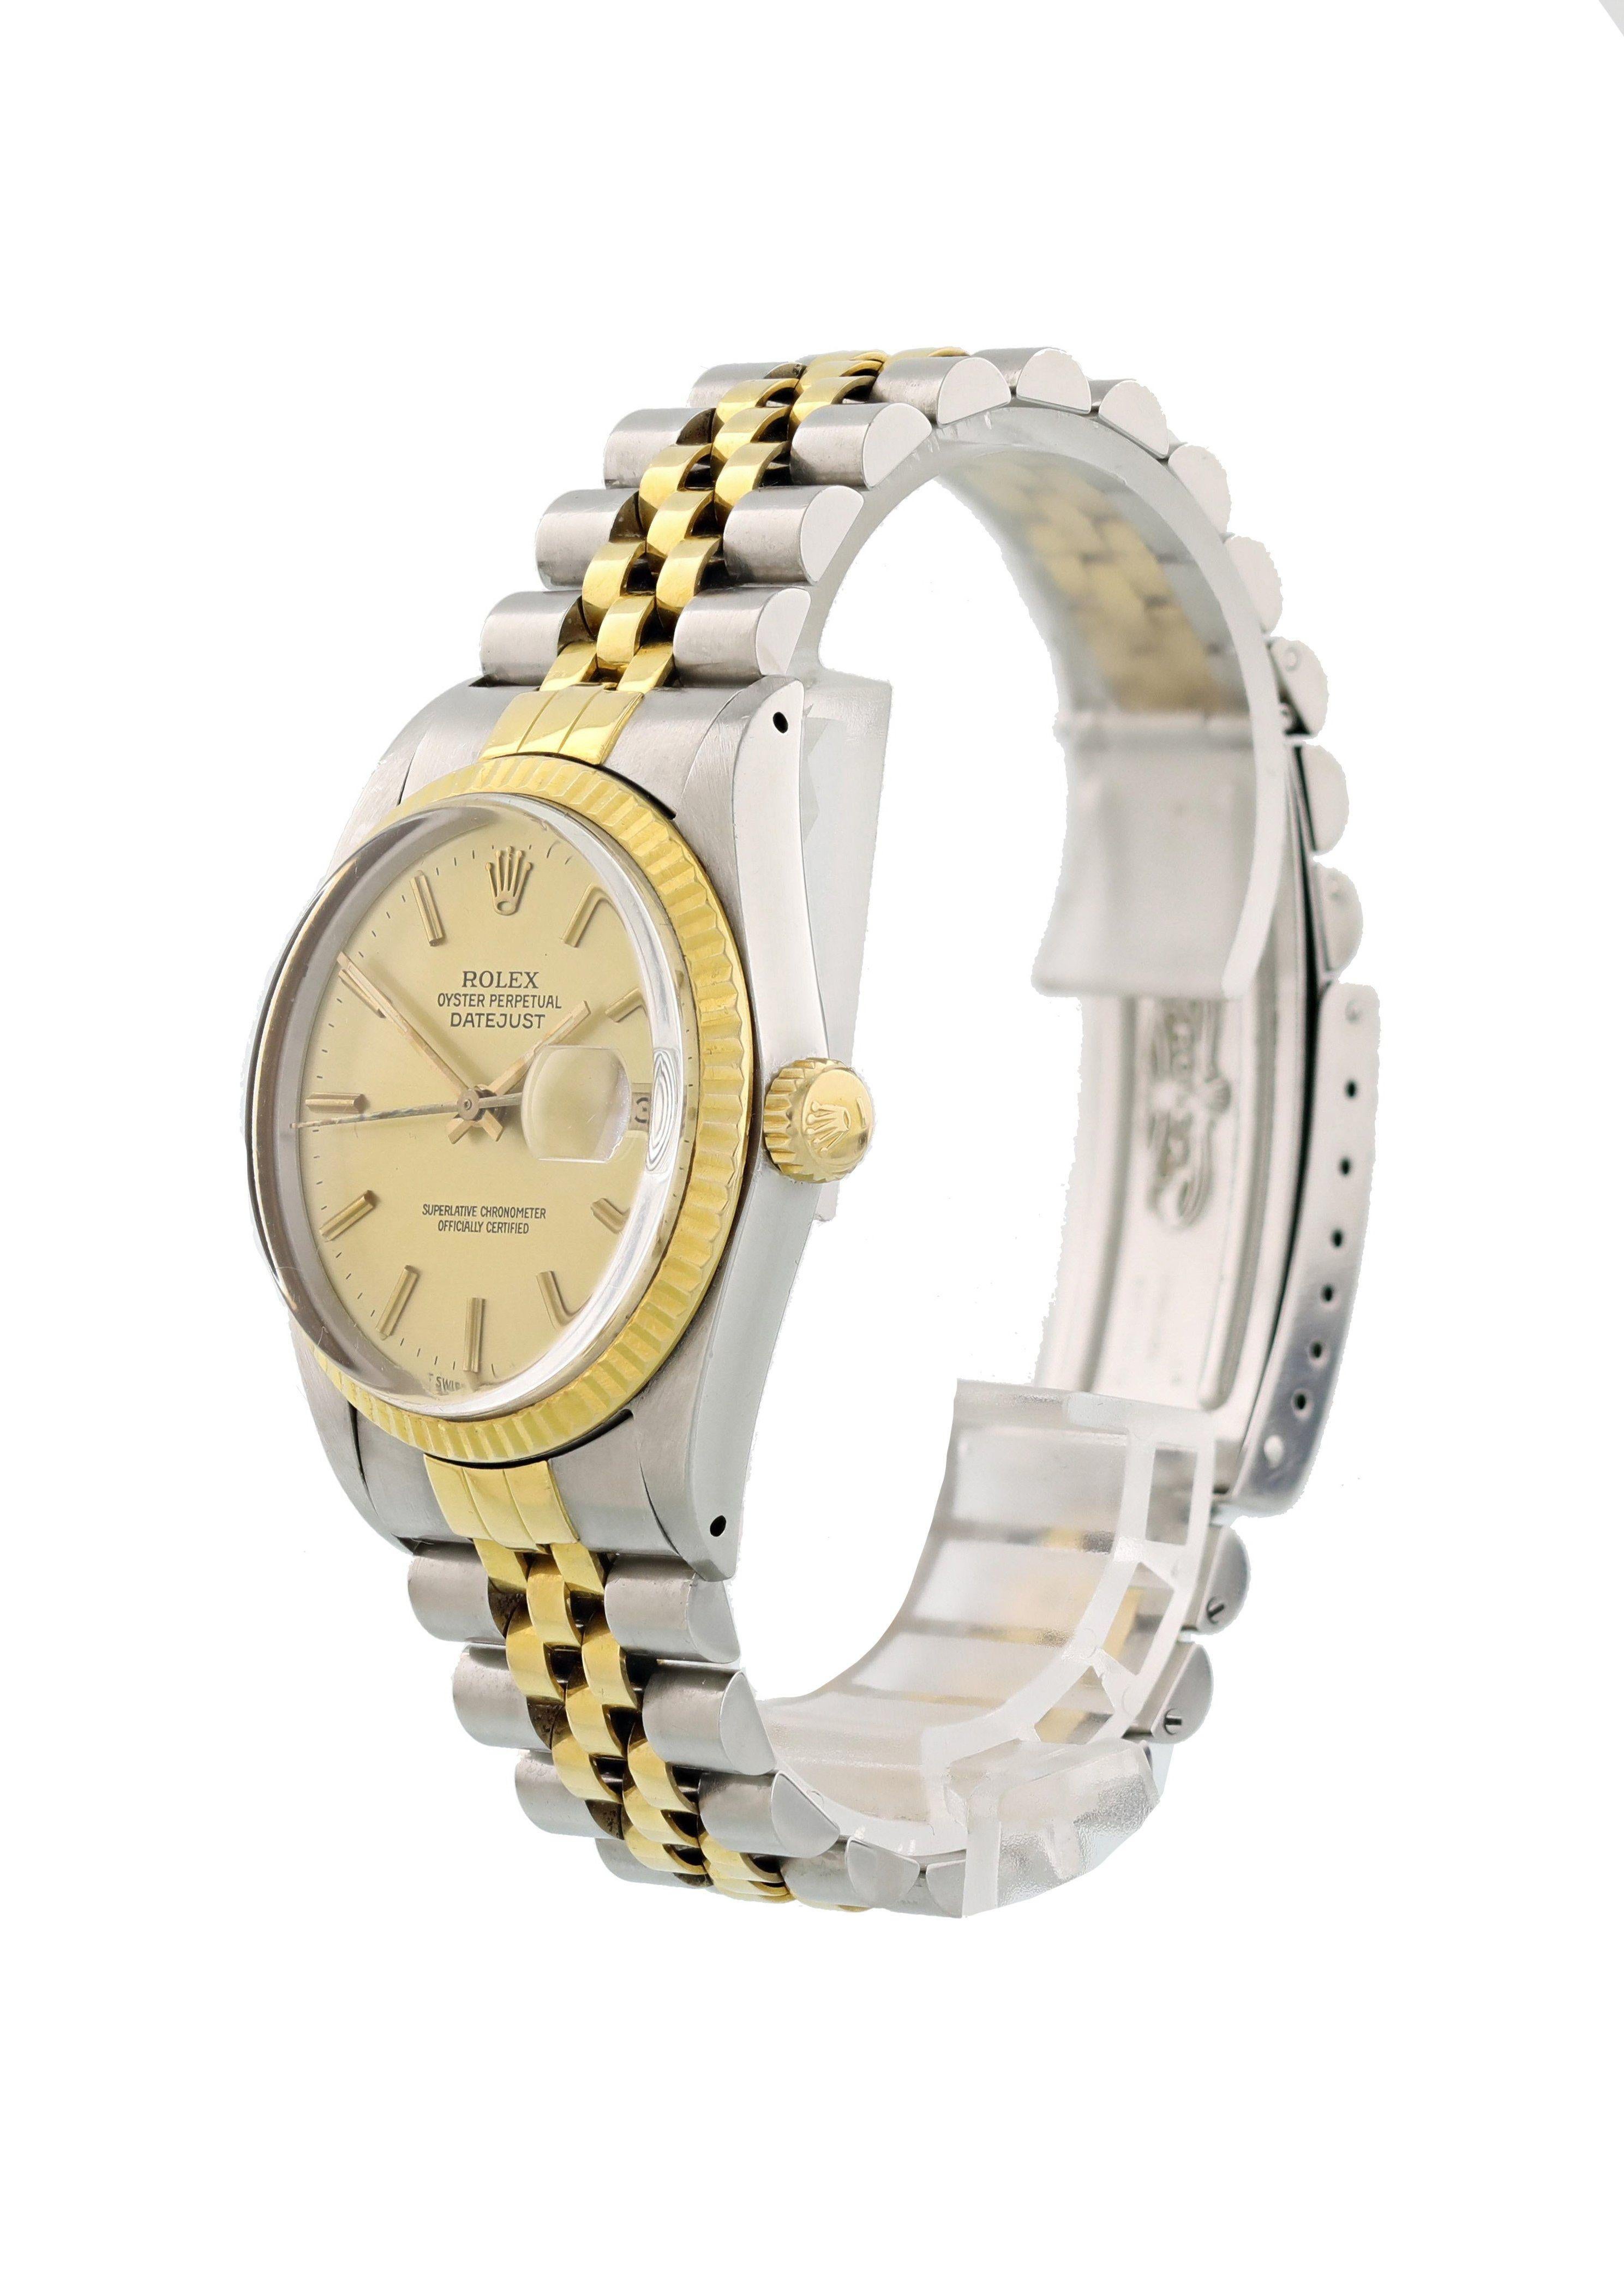 Rolex Oyster Perpetual Datejust 16013 Mens Watch. 
Stainless steel 36mm case. 
18k yellow gold fluted bezel. 
Champagne dial with gold hands and stick index markers. 
Date display at the 3 o'clock position. 
18k yellow gold and stainless steel band